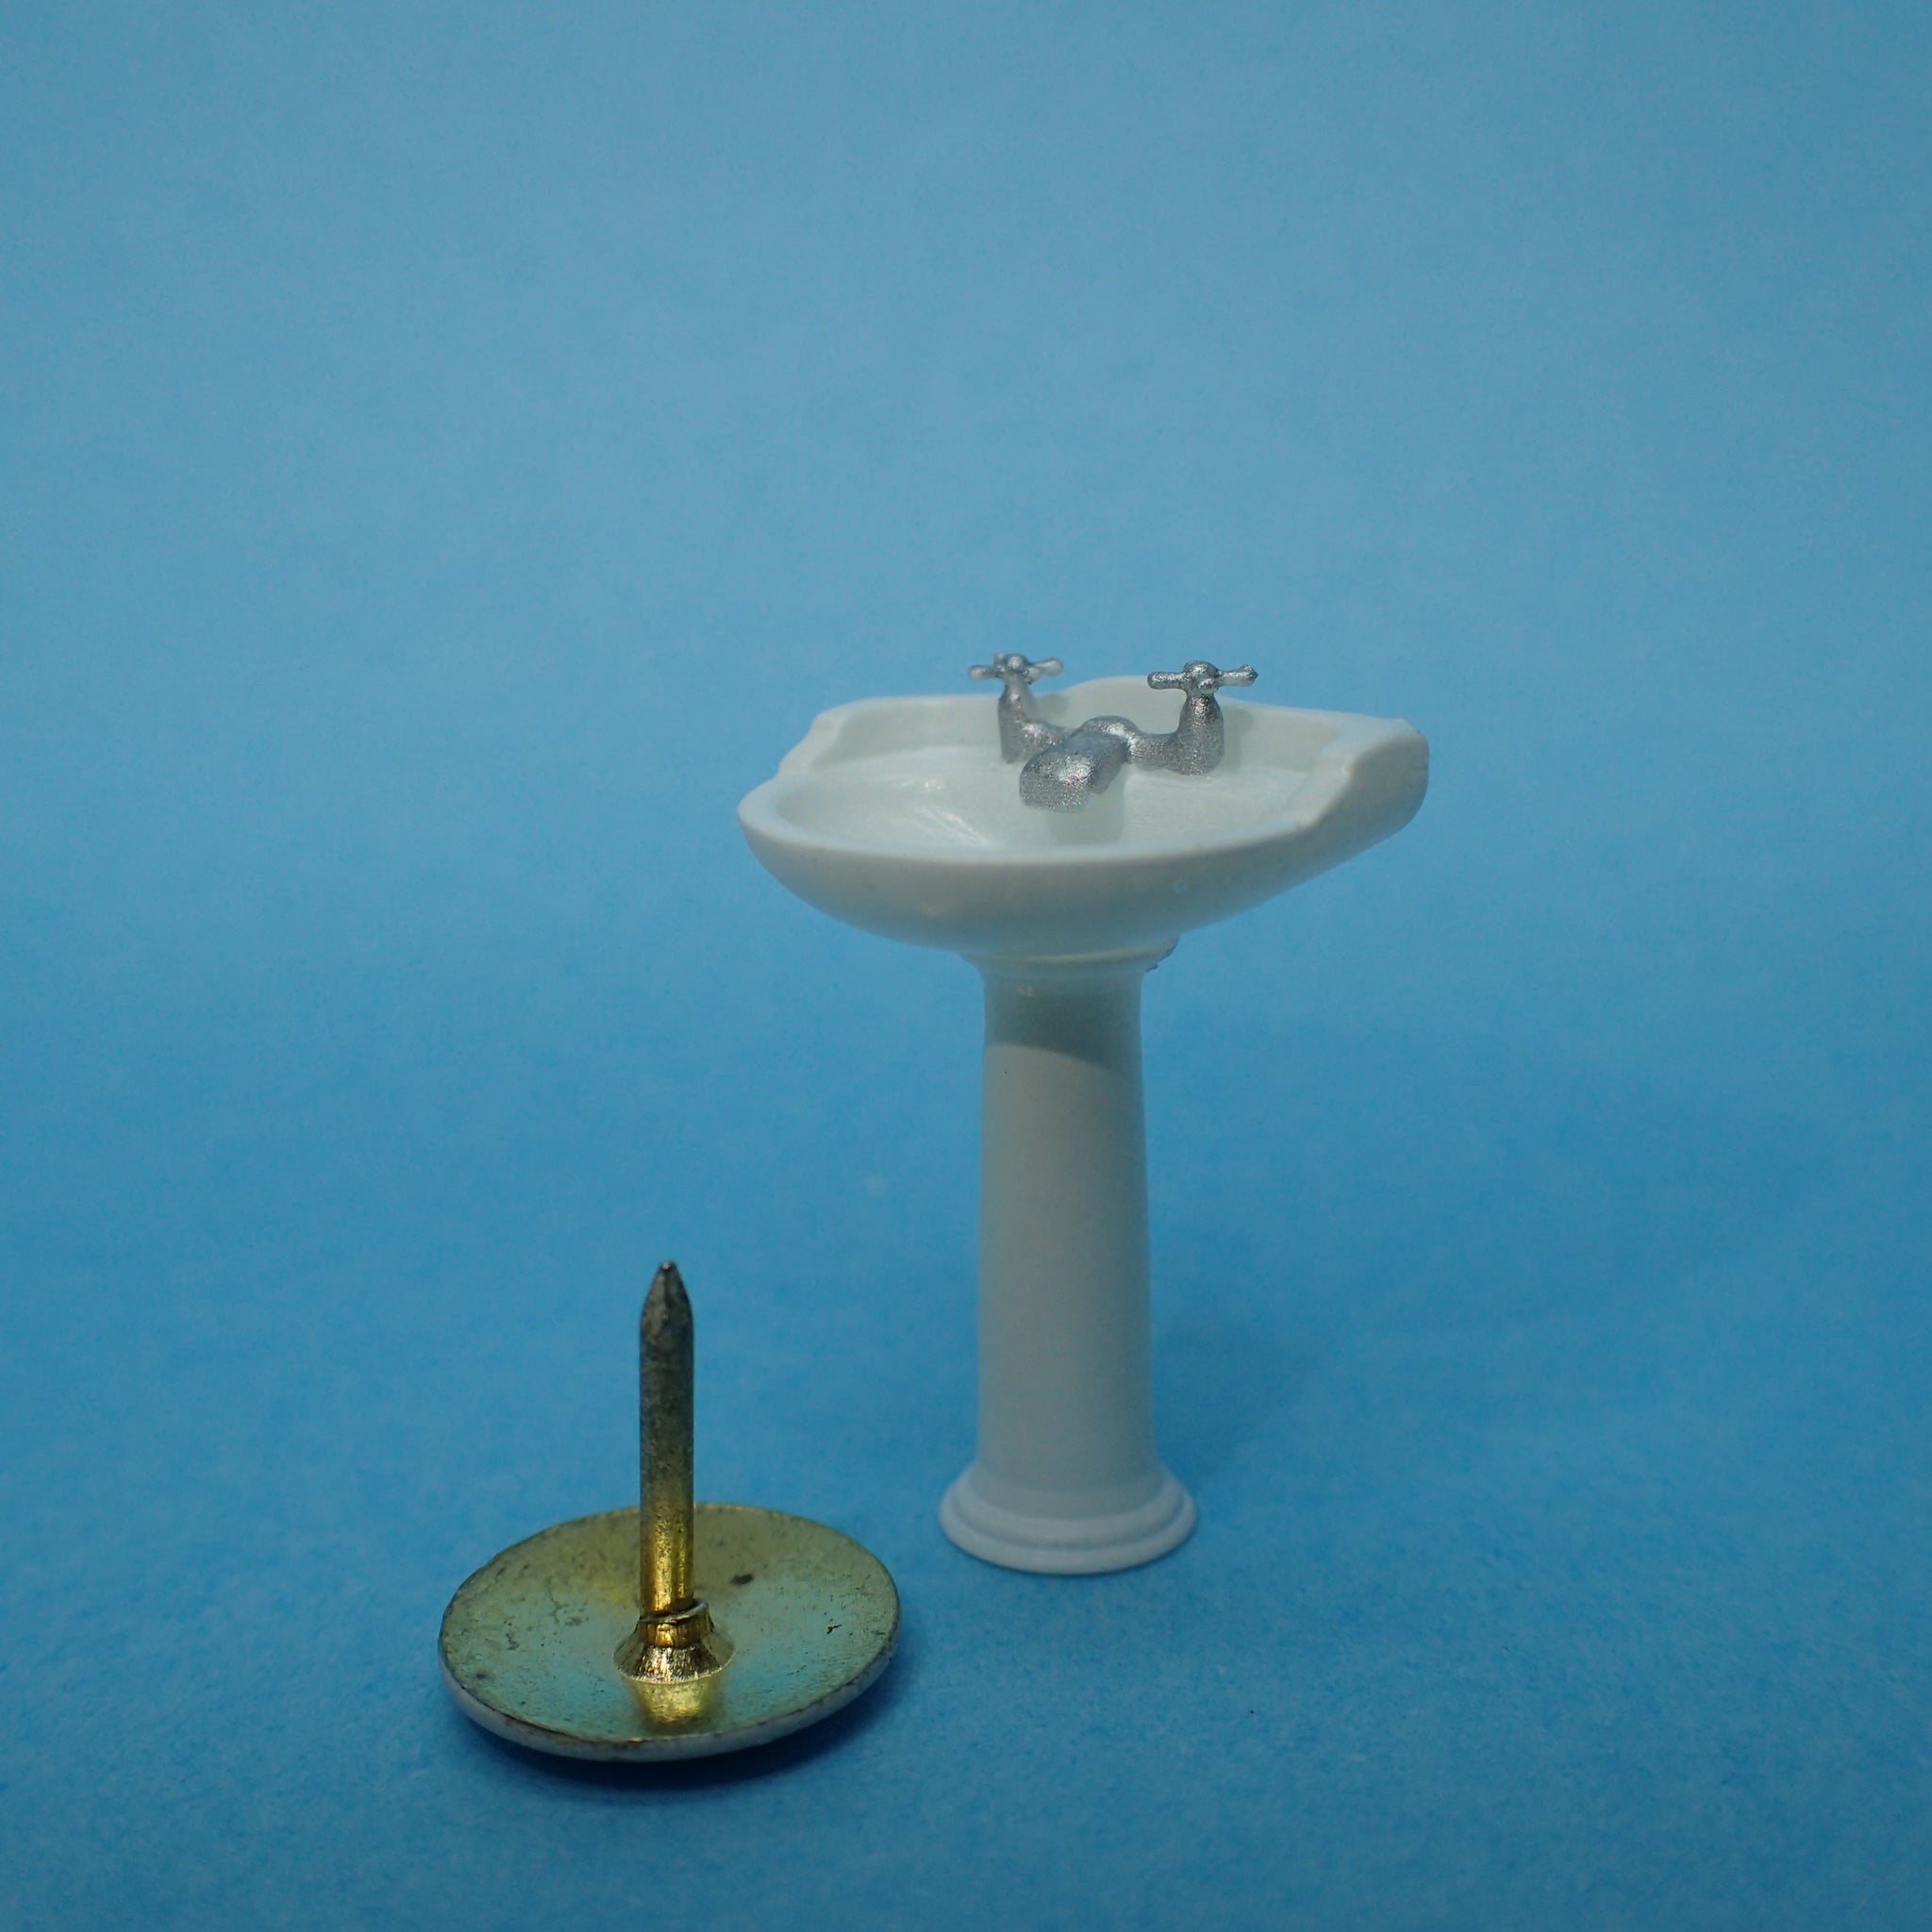 Traditional bathroom sink, 1/48th scale